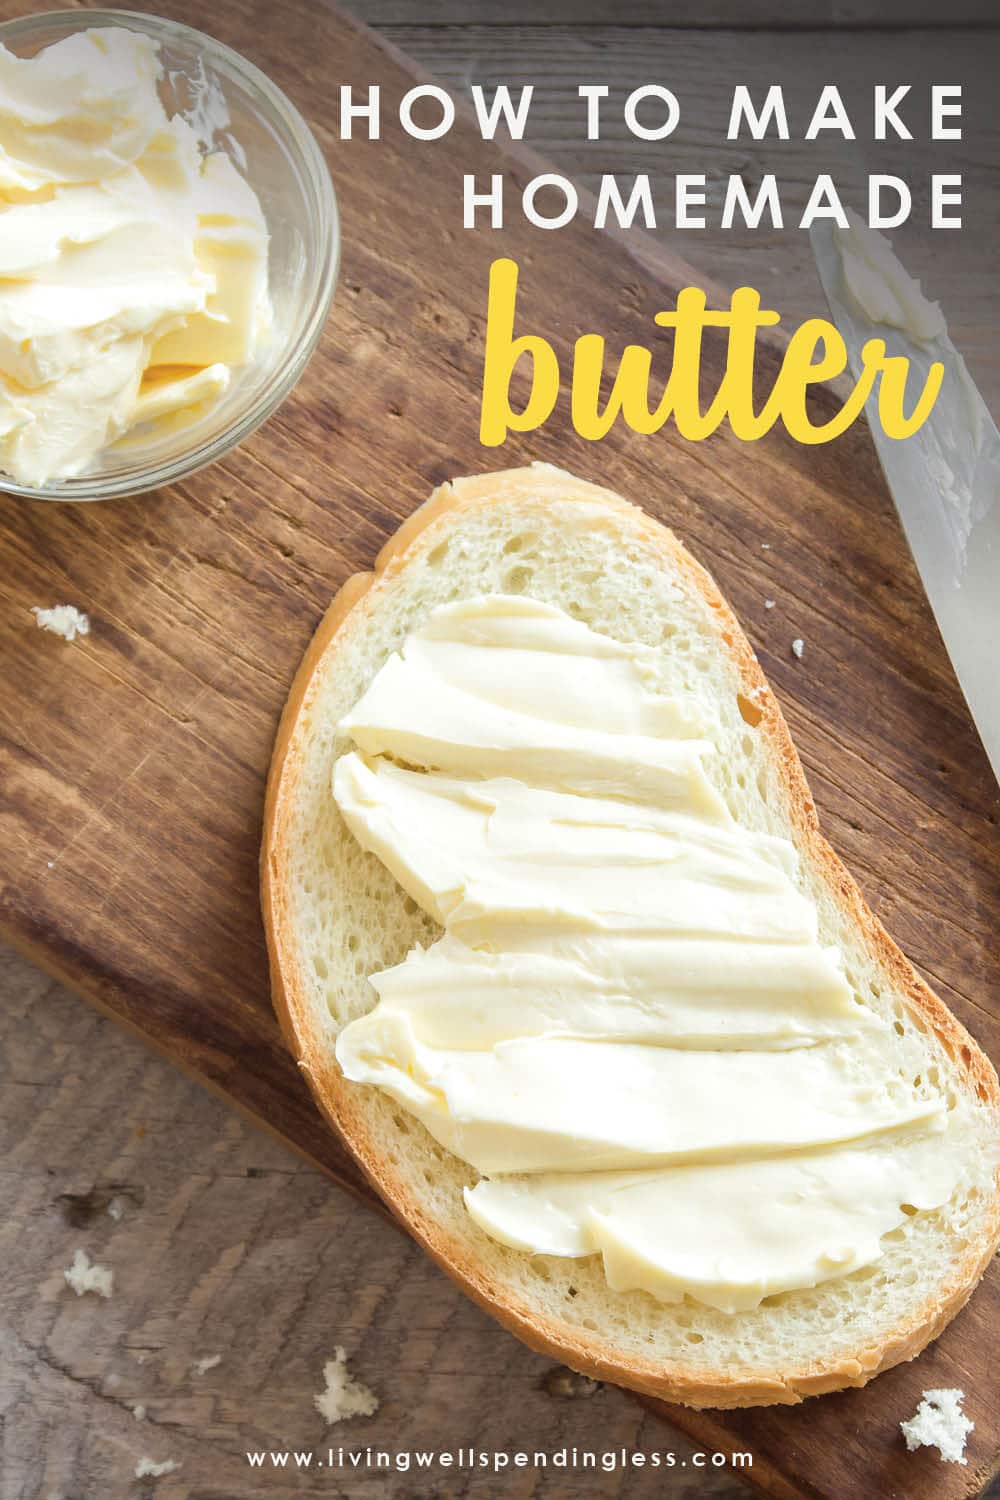 How to Make Homemade Butter with KitchenAid Mixer